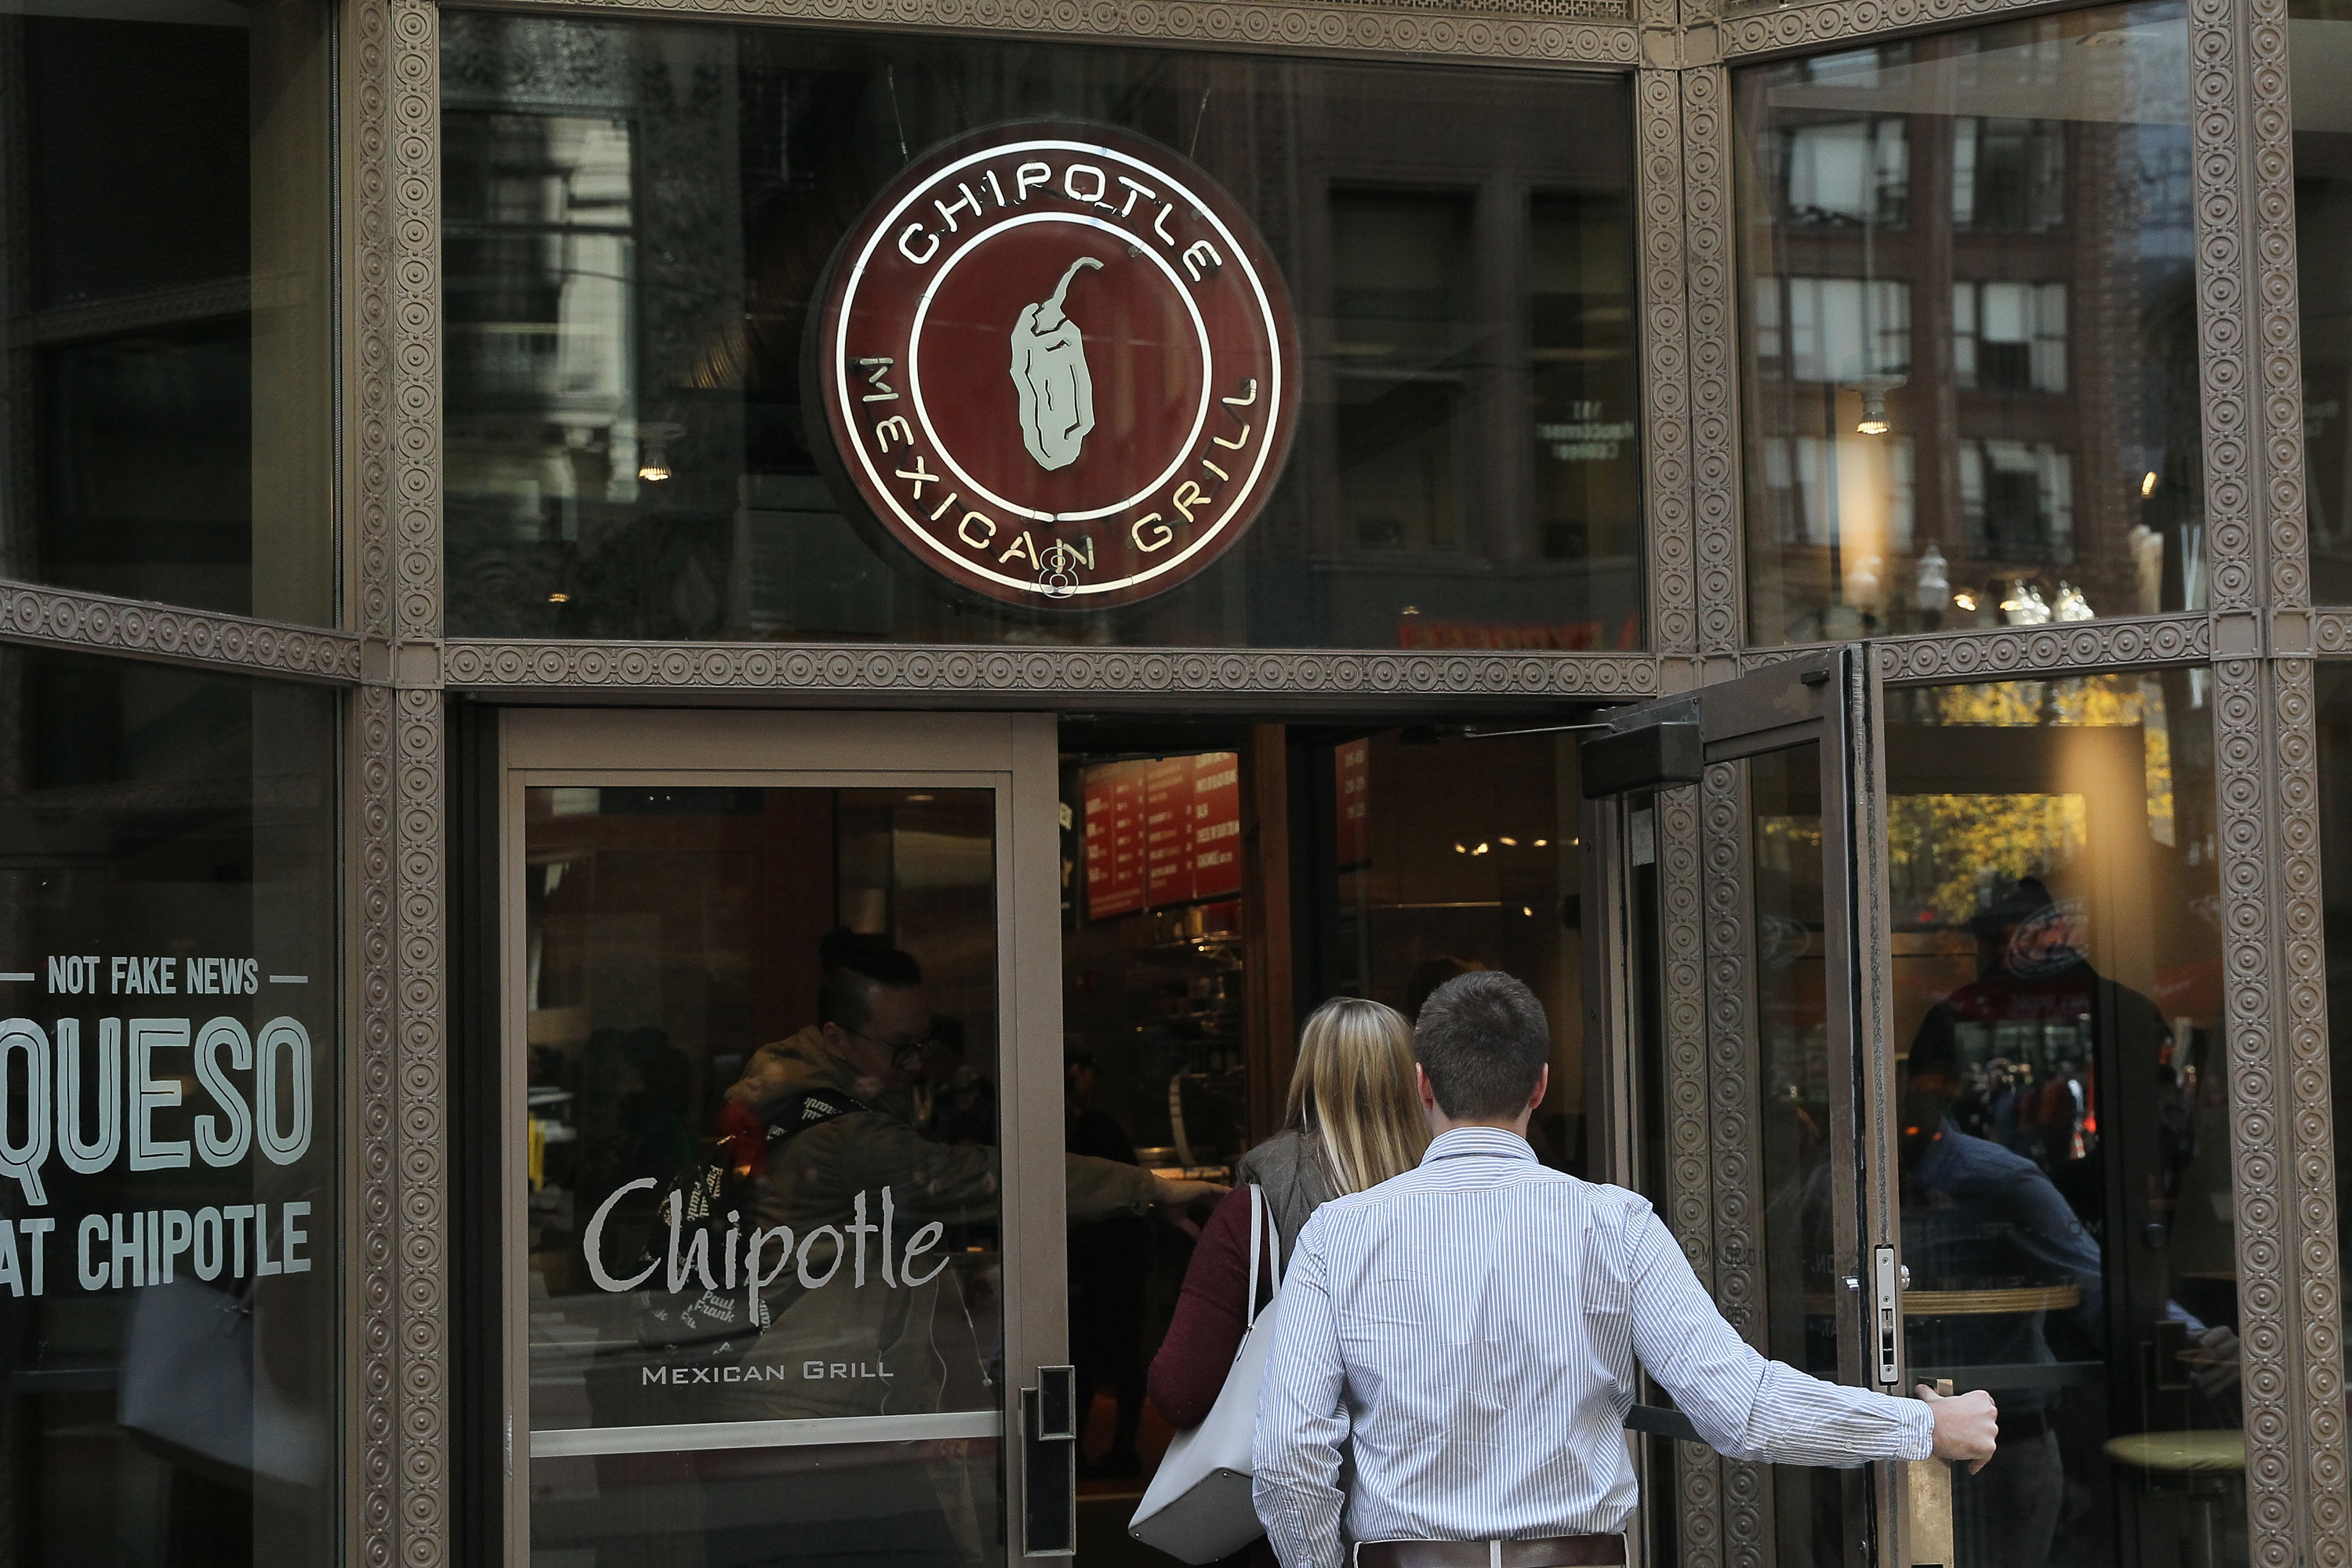 A Chipotle Manager Fired for Stealing $626 Just Won $8 Million In a Wrongful Termination Suit